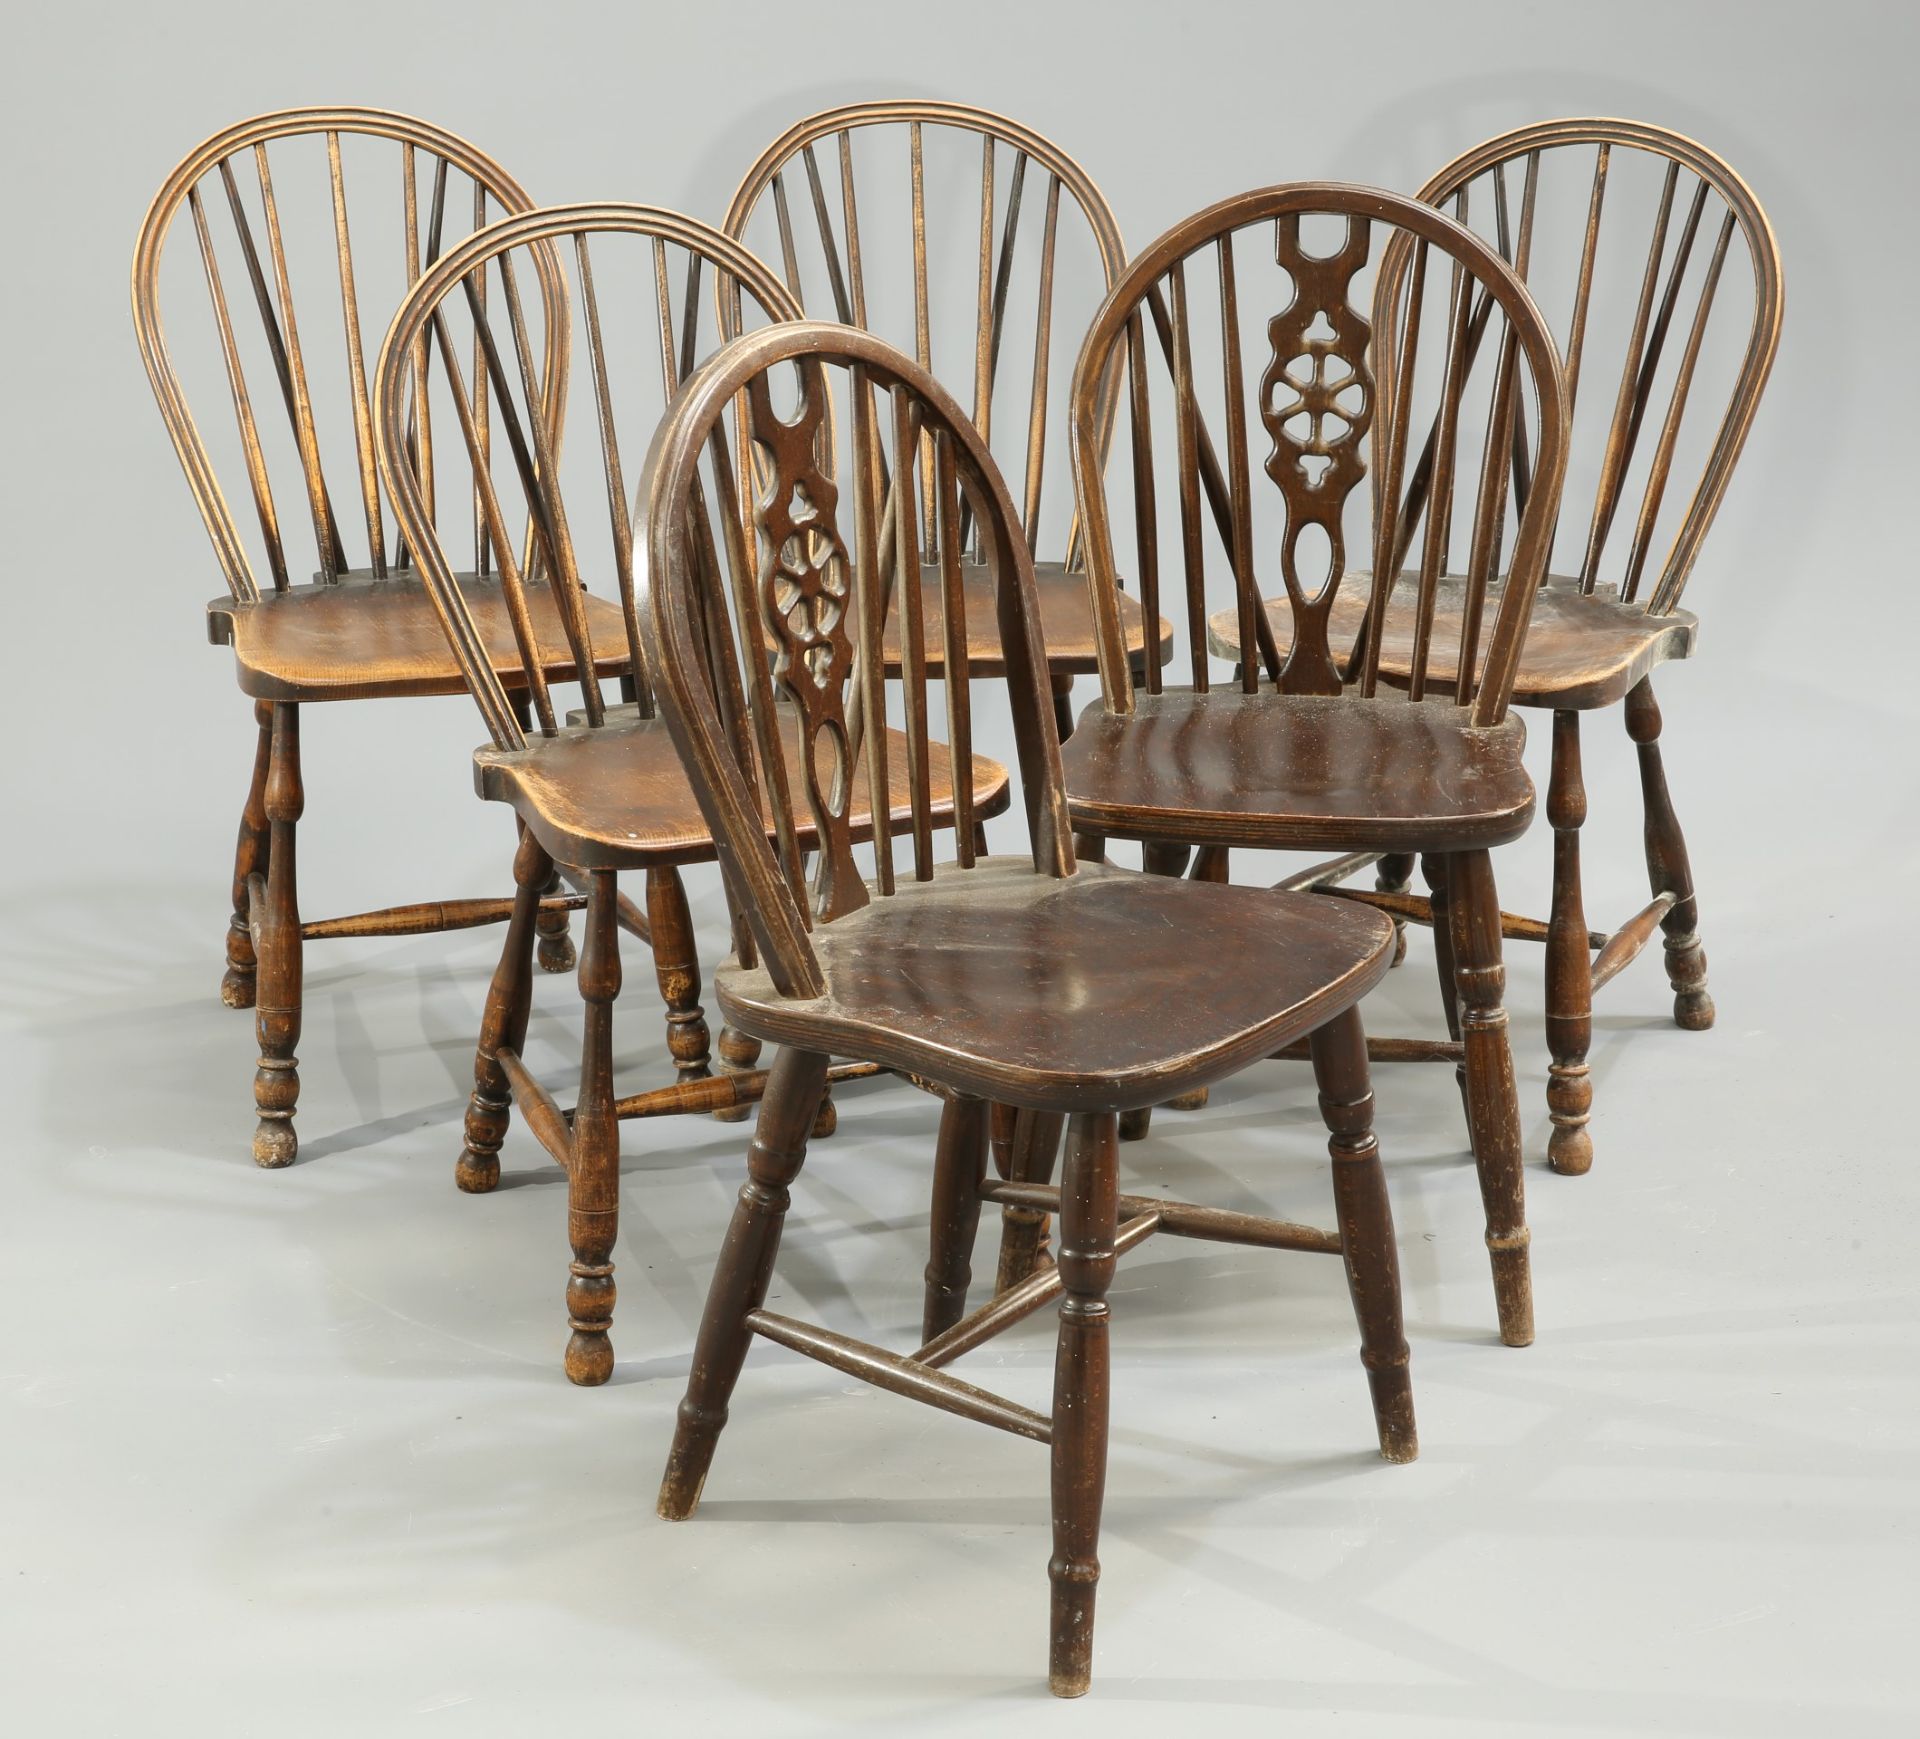 A matched set of six Windsor dining chairs, 20th Century